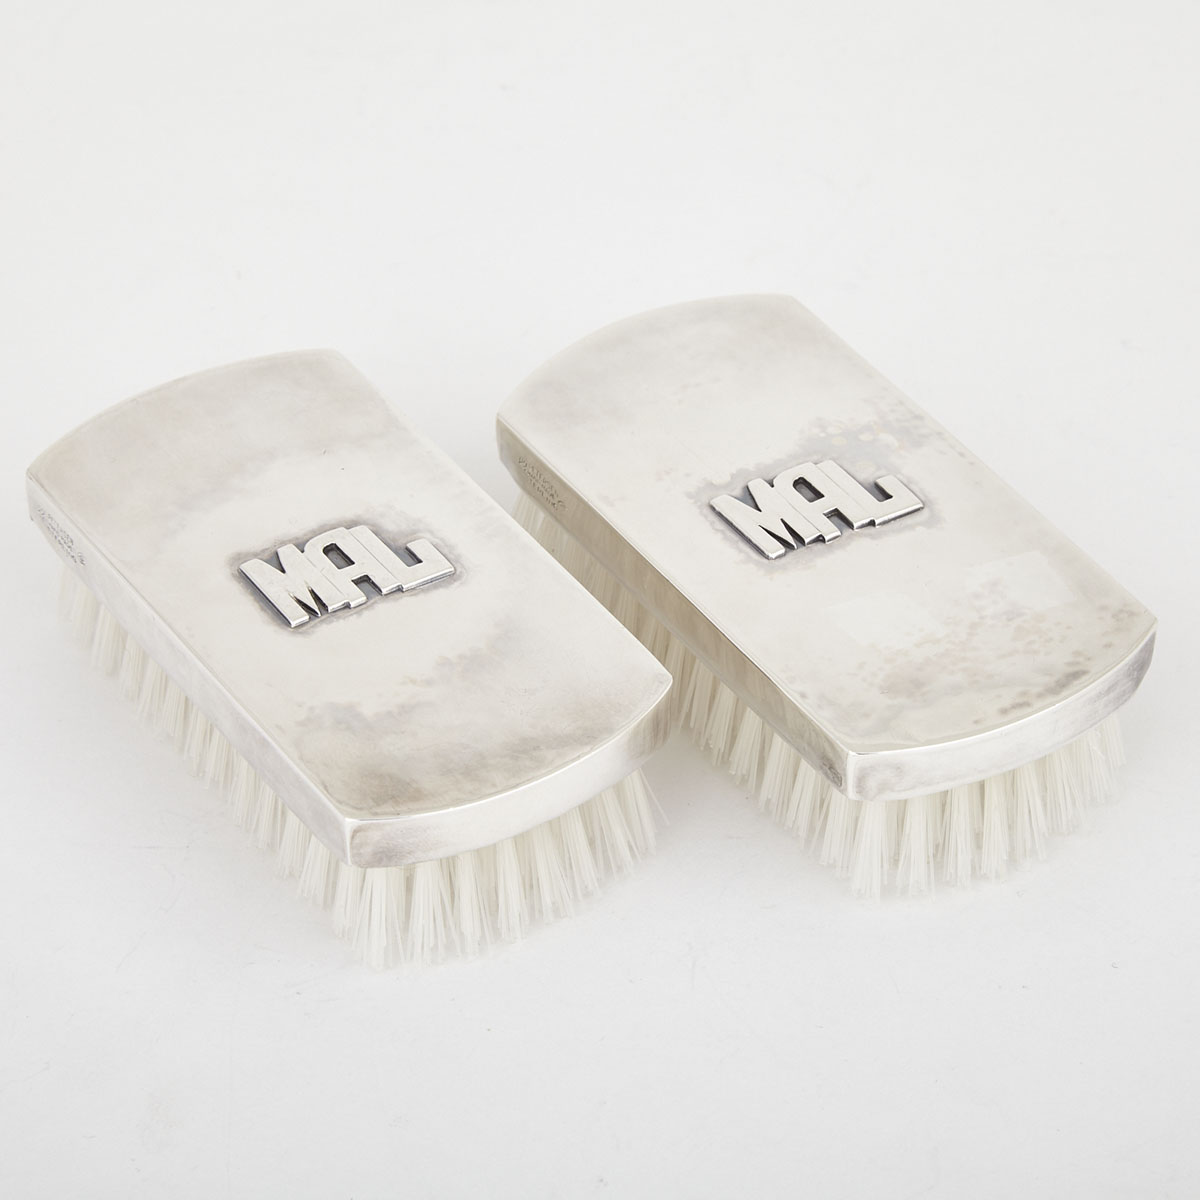 Pair of Canadian Silver Hair Brushes, Carl Poul Petersen, Montreal, Que., mid-20th century 